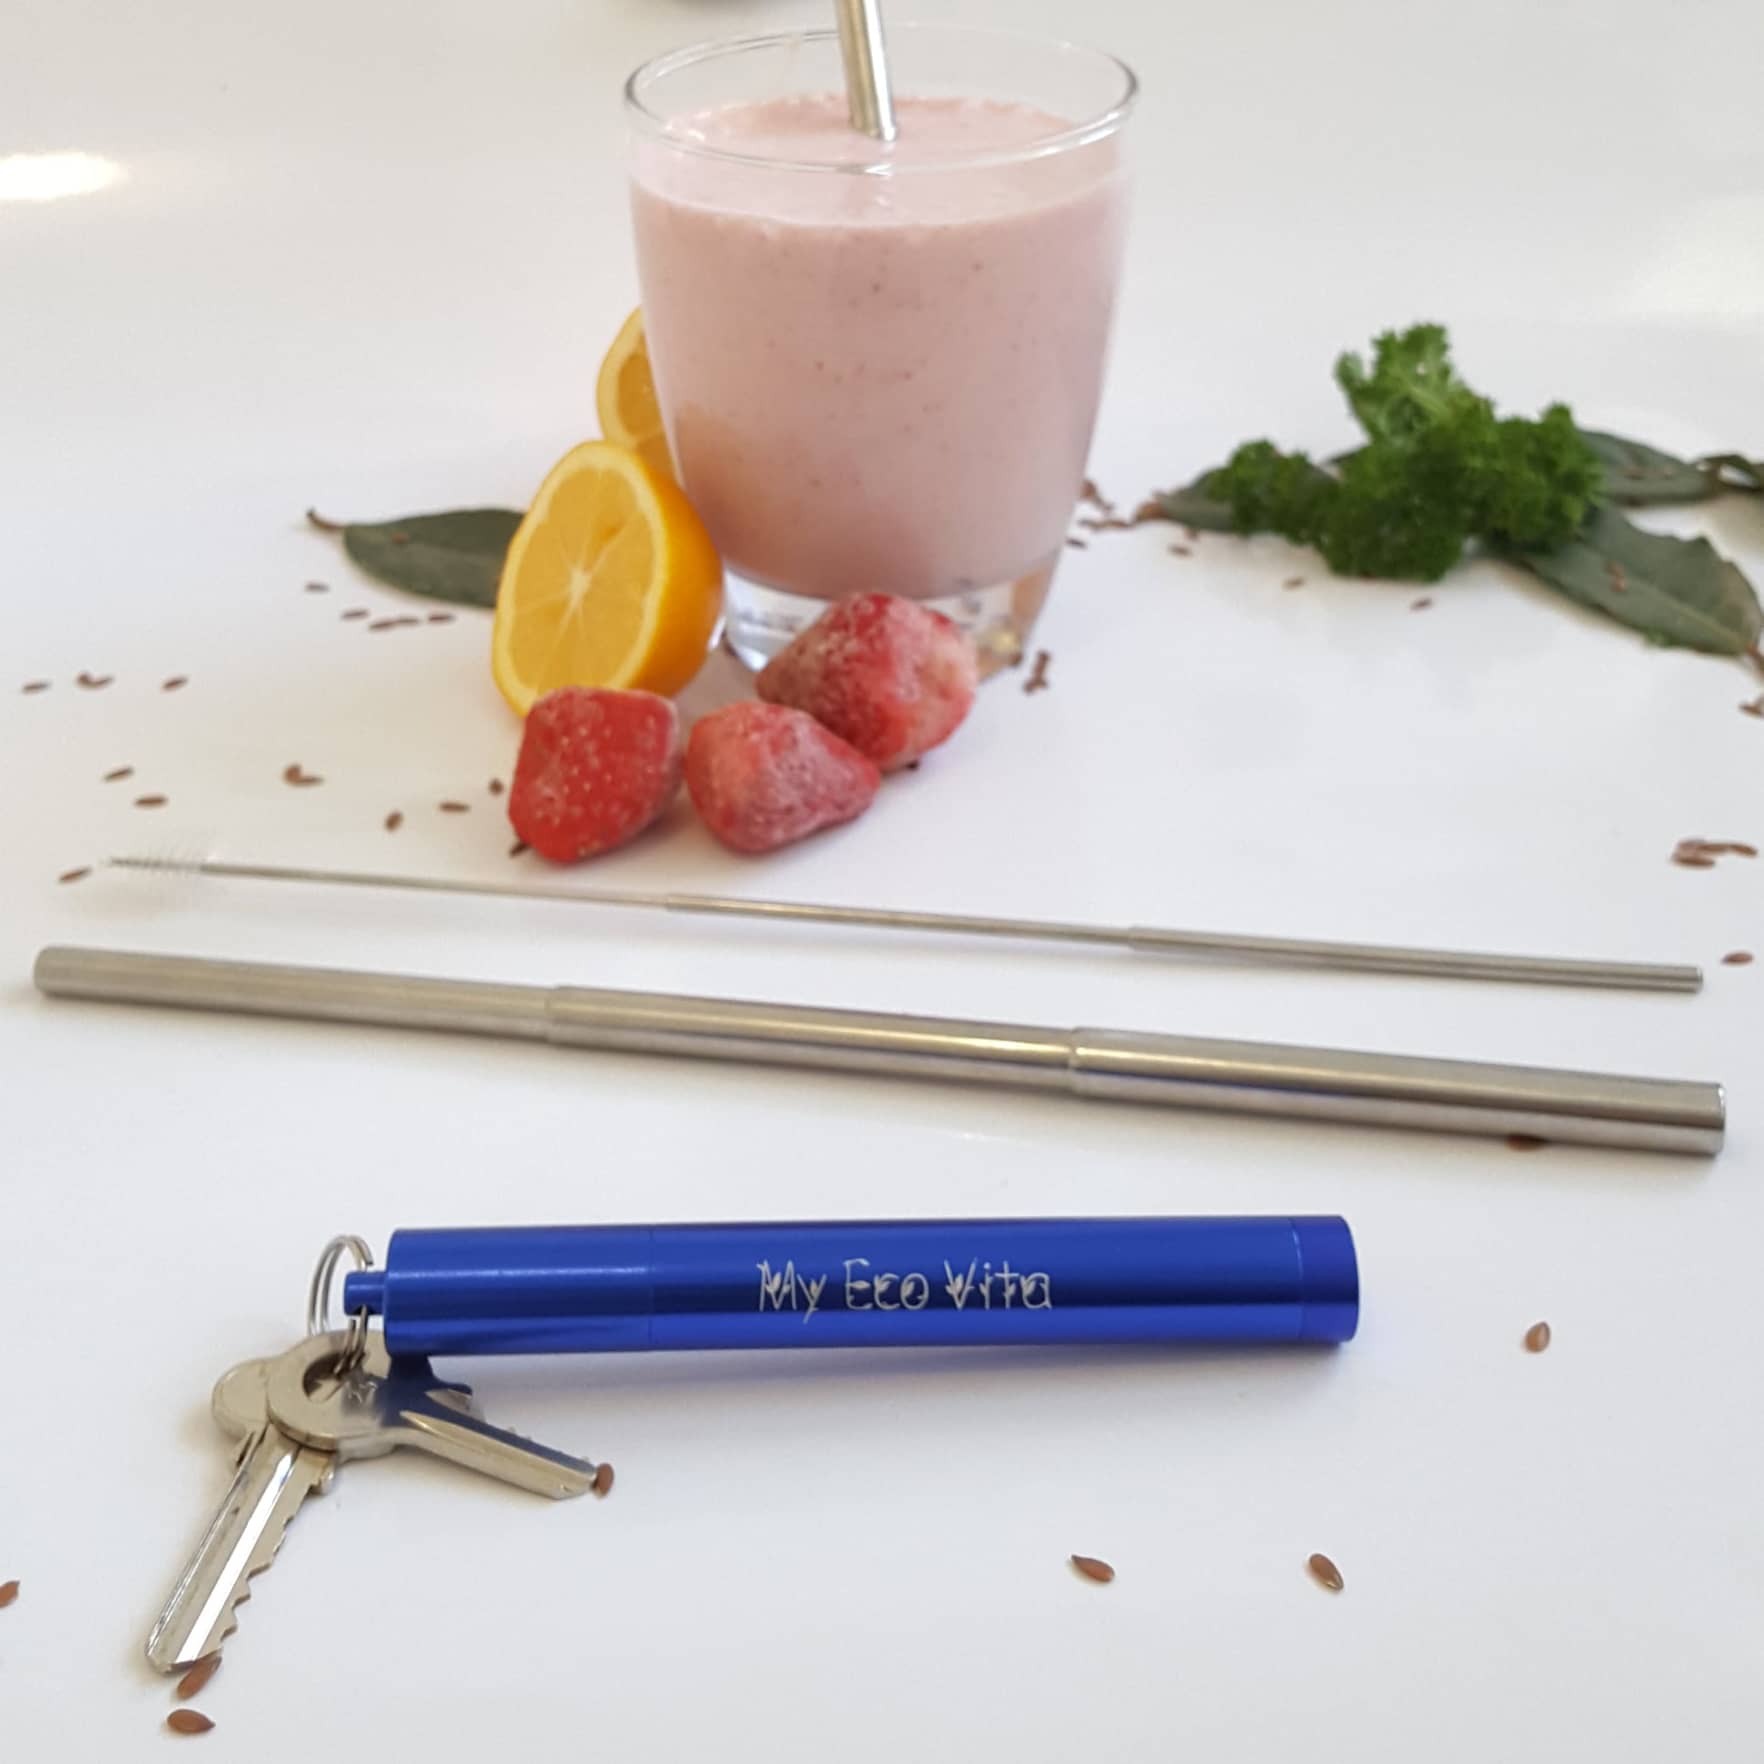 Reusable metal straws that can be used as a keychain. A completely collapsable straw that comes in a metal case with a cleaning brush. Avoid single use straws, use reusable straws